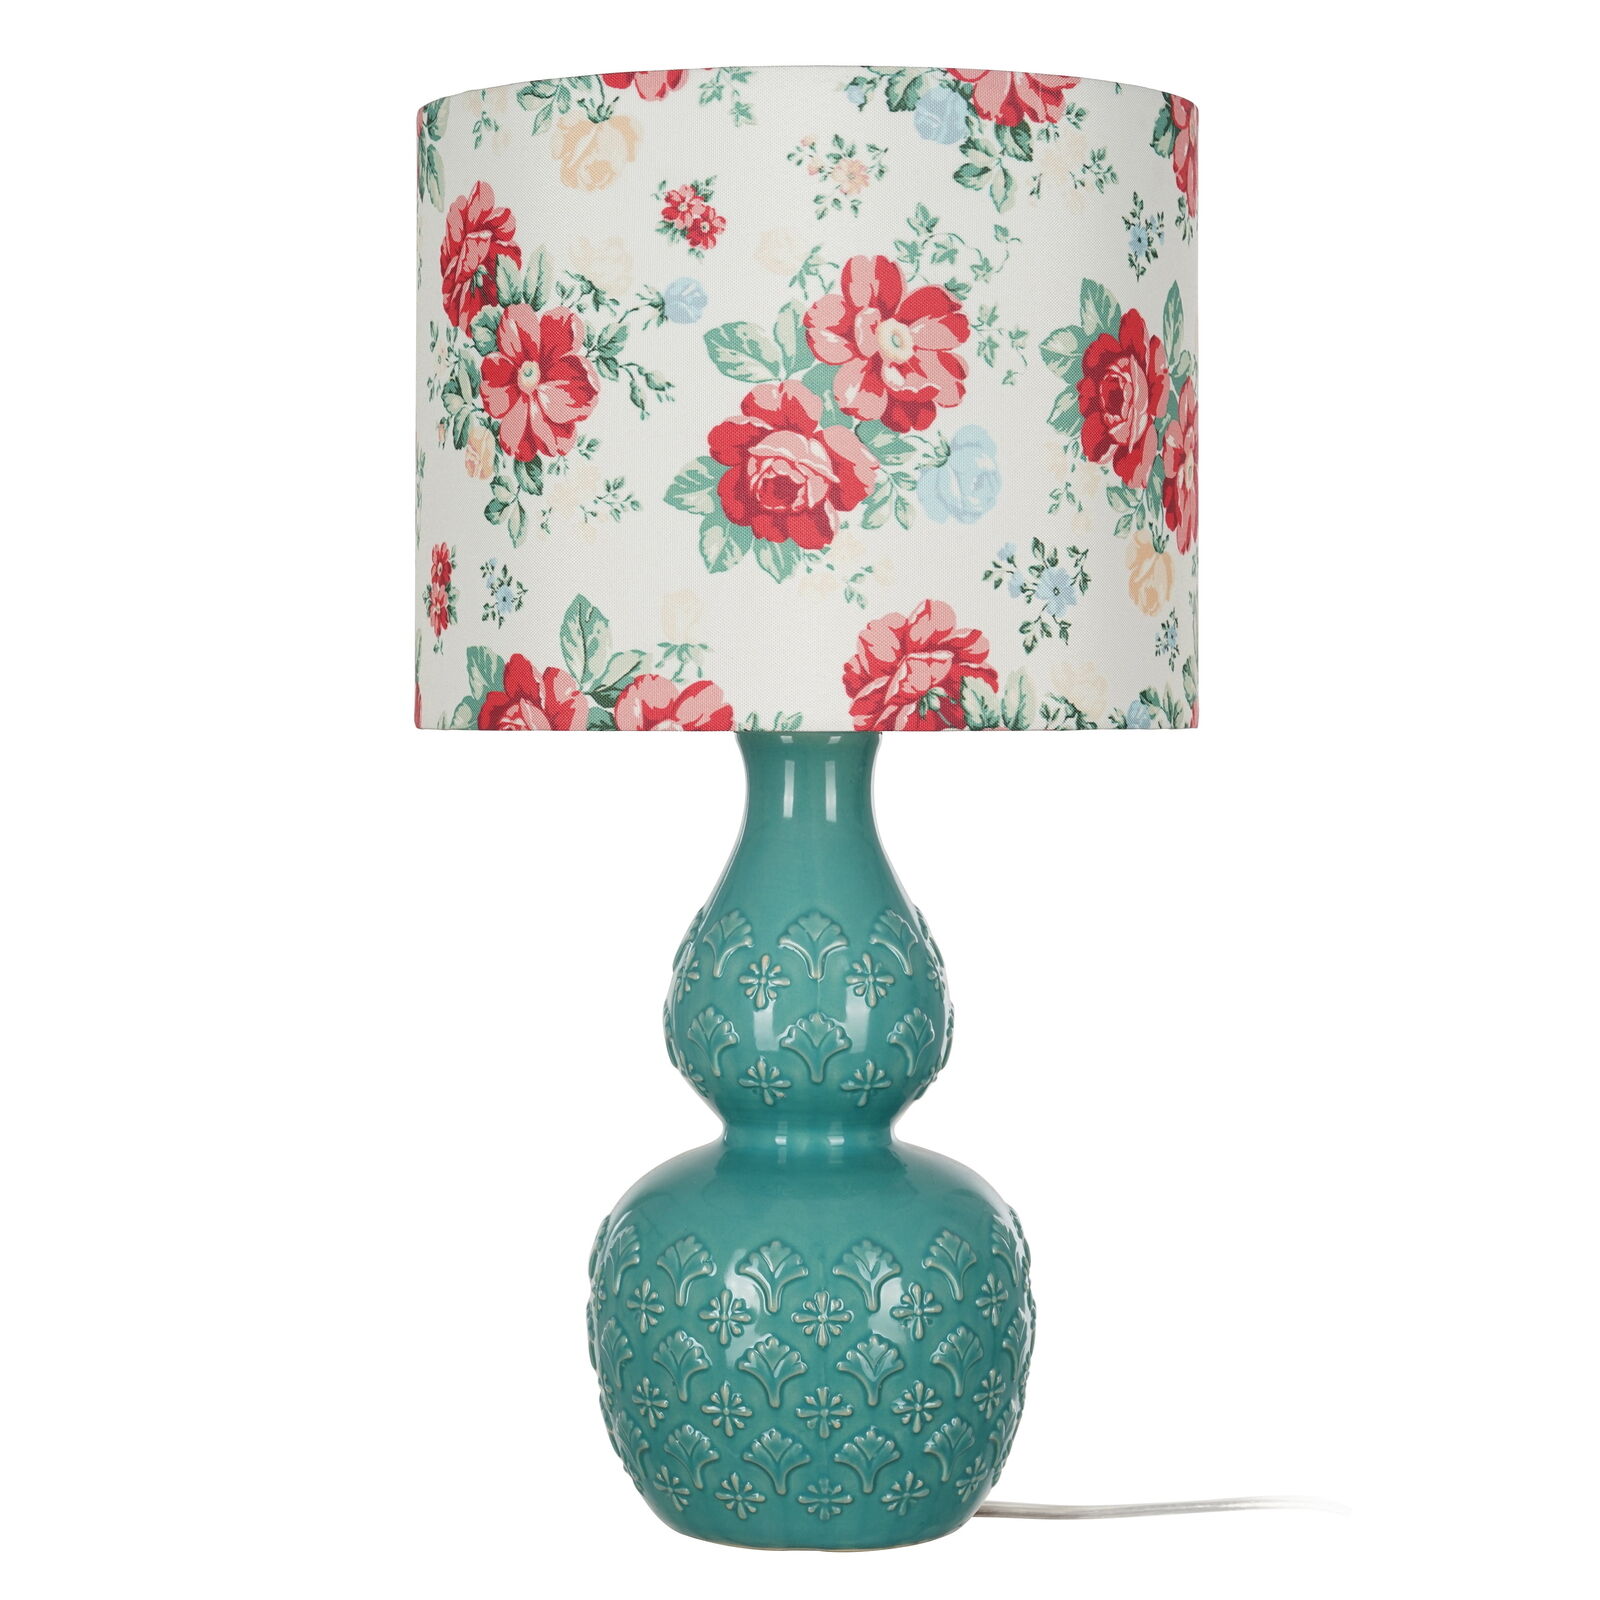 Vintage-Style Floral Table Lamp: Green Finish for a Classic Touch of Elegance